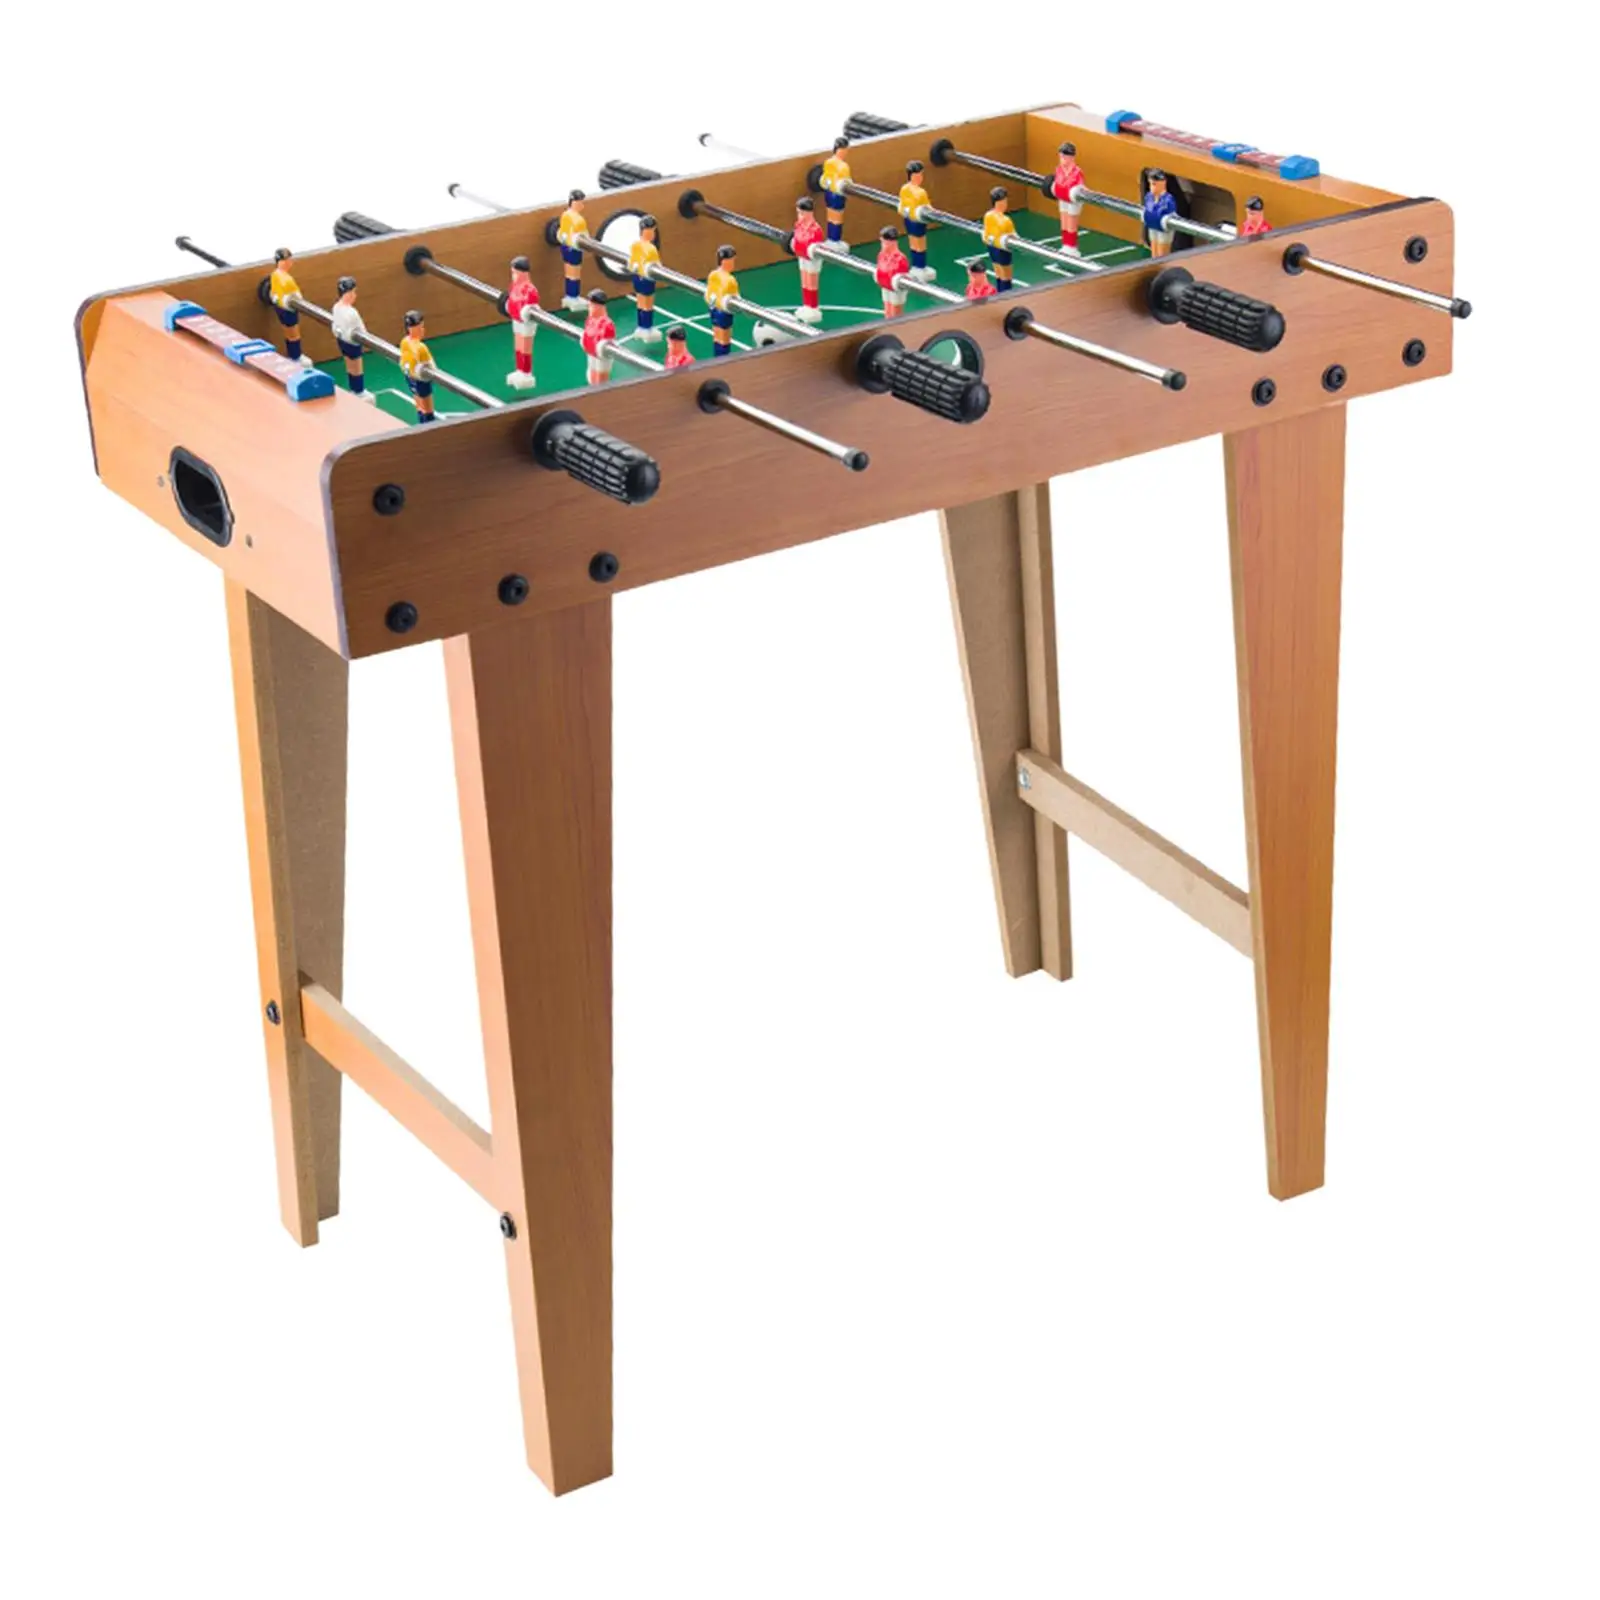 Portable Foosball Table Sports with Ball Toy Tabletop Football Game for Kids